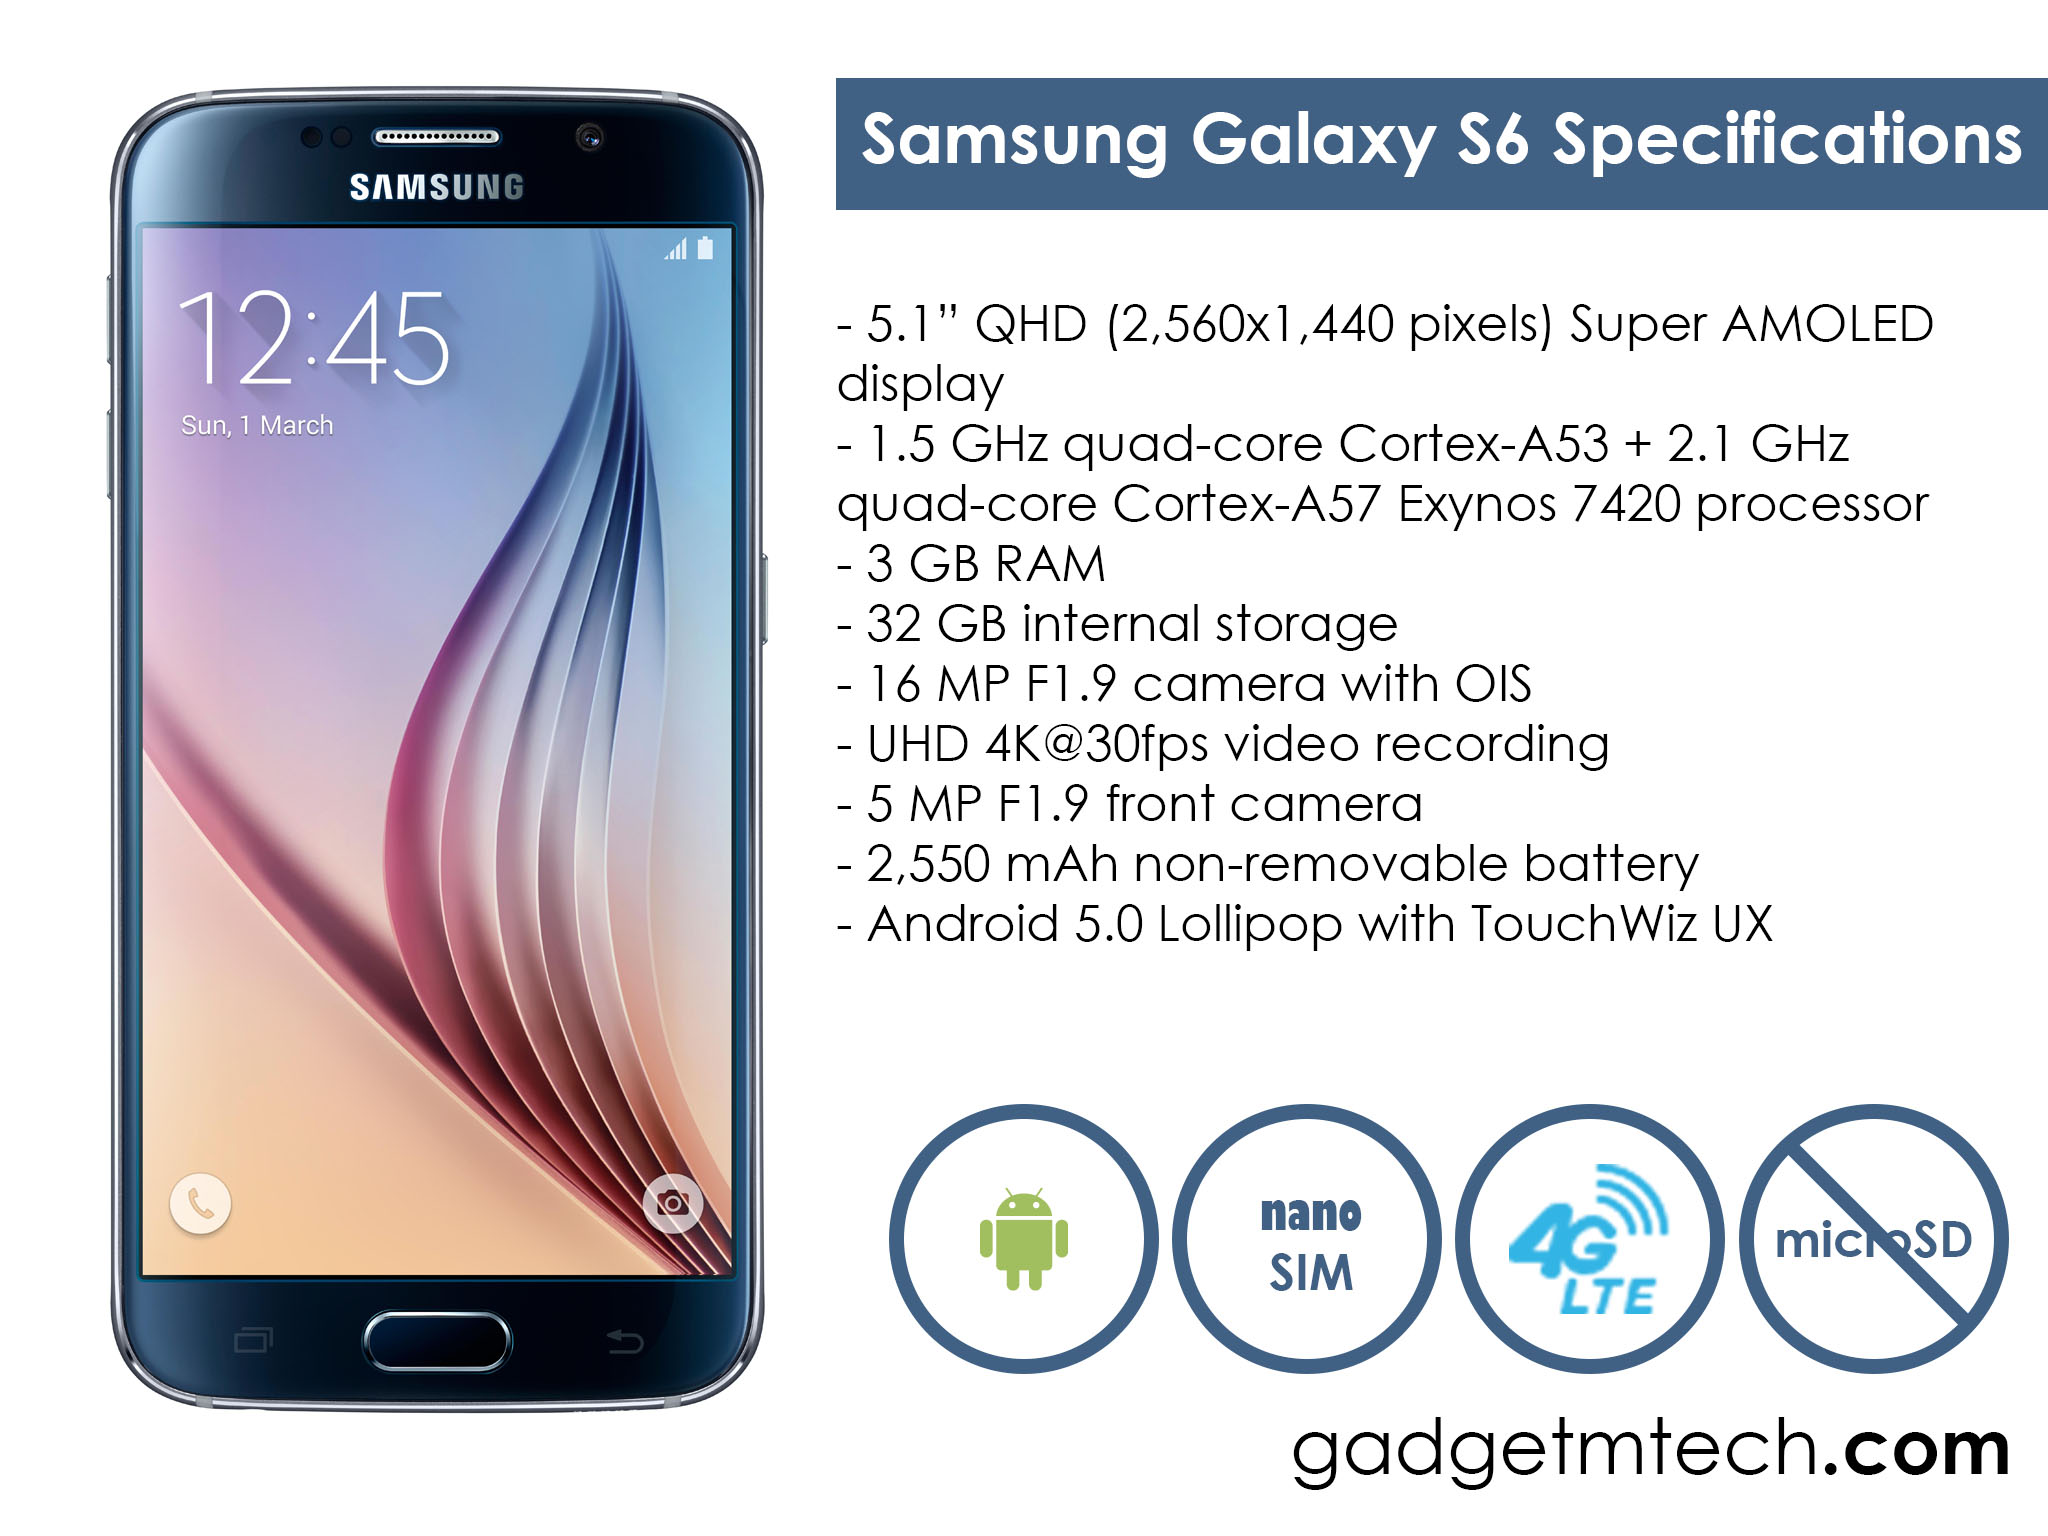 Samsung Galaxy S6 Specifications